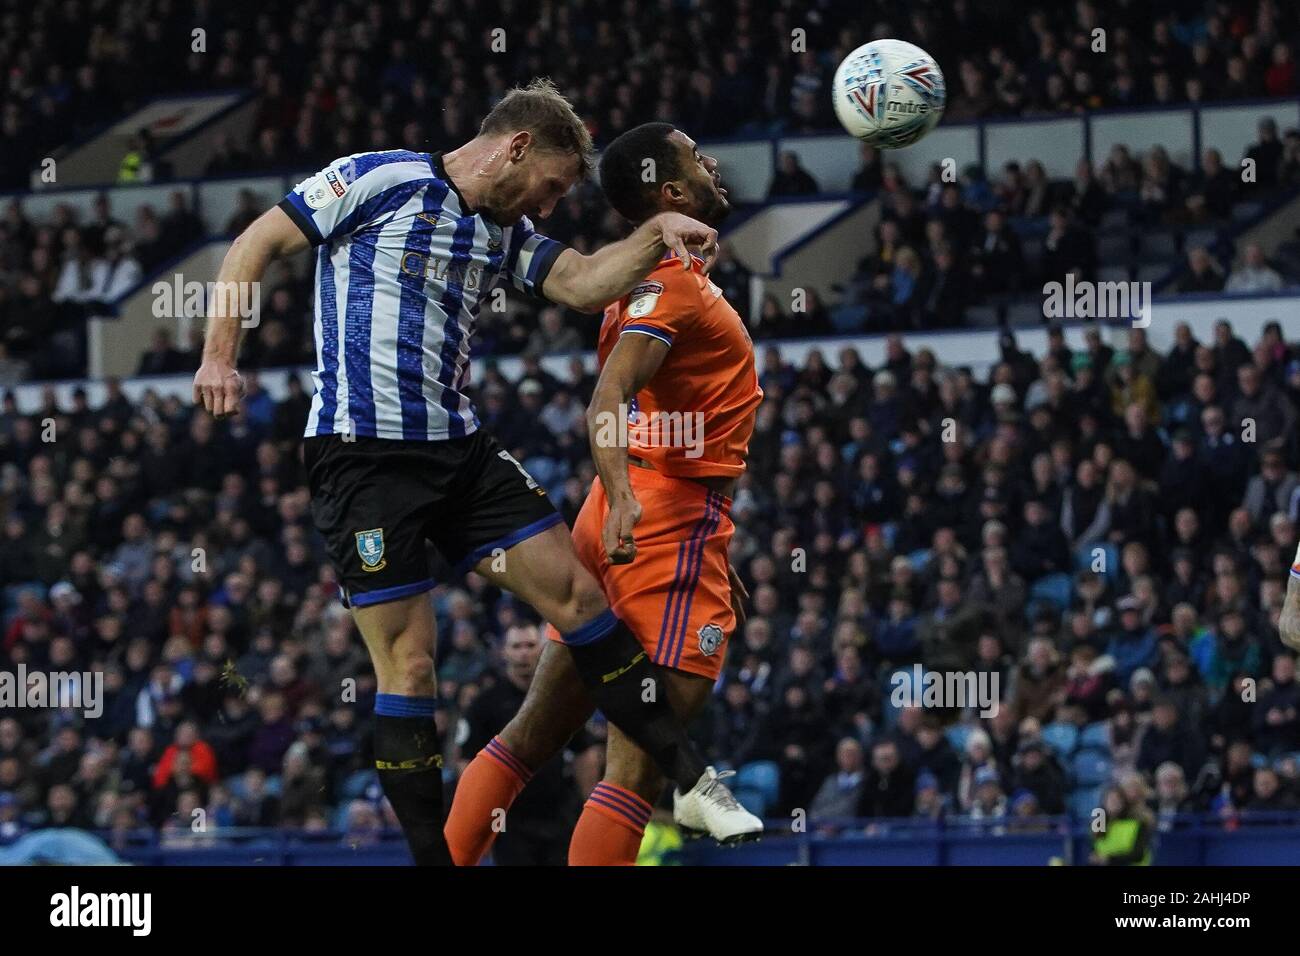 29th December 2019, Hillsborough, Sheffield, England; Sky Bet Championship, Sheffield Wednesday v Cardiff City : Tom Lees (15) of Sheffield Wednesday heads the ball into the back of the net to make it 2-1  Credit: Kurt Fairhurst/News Images Stock Photo